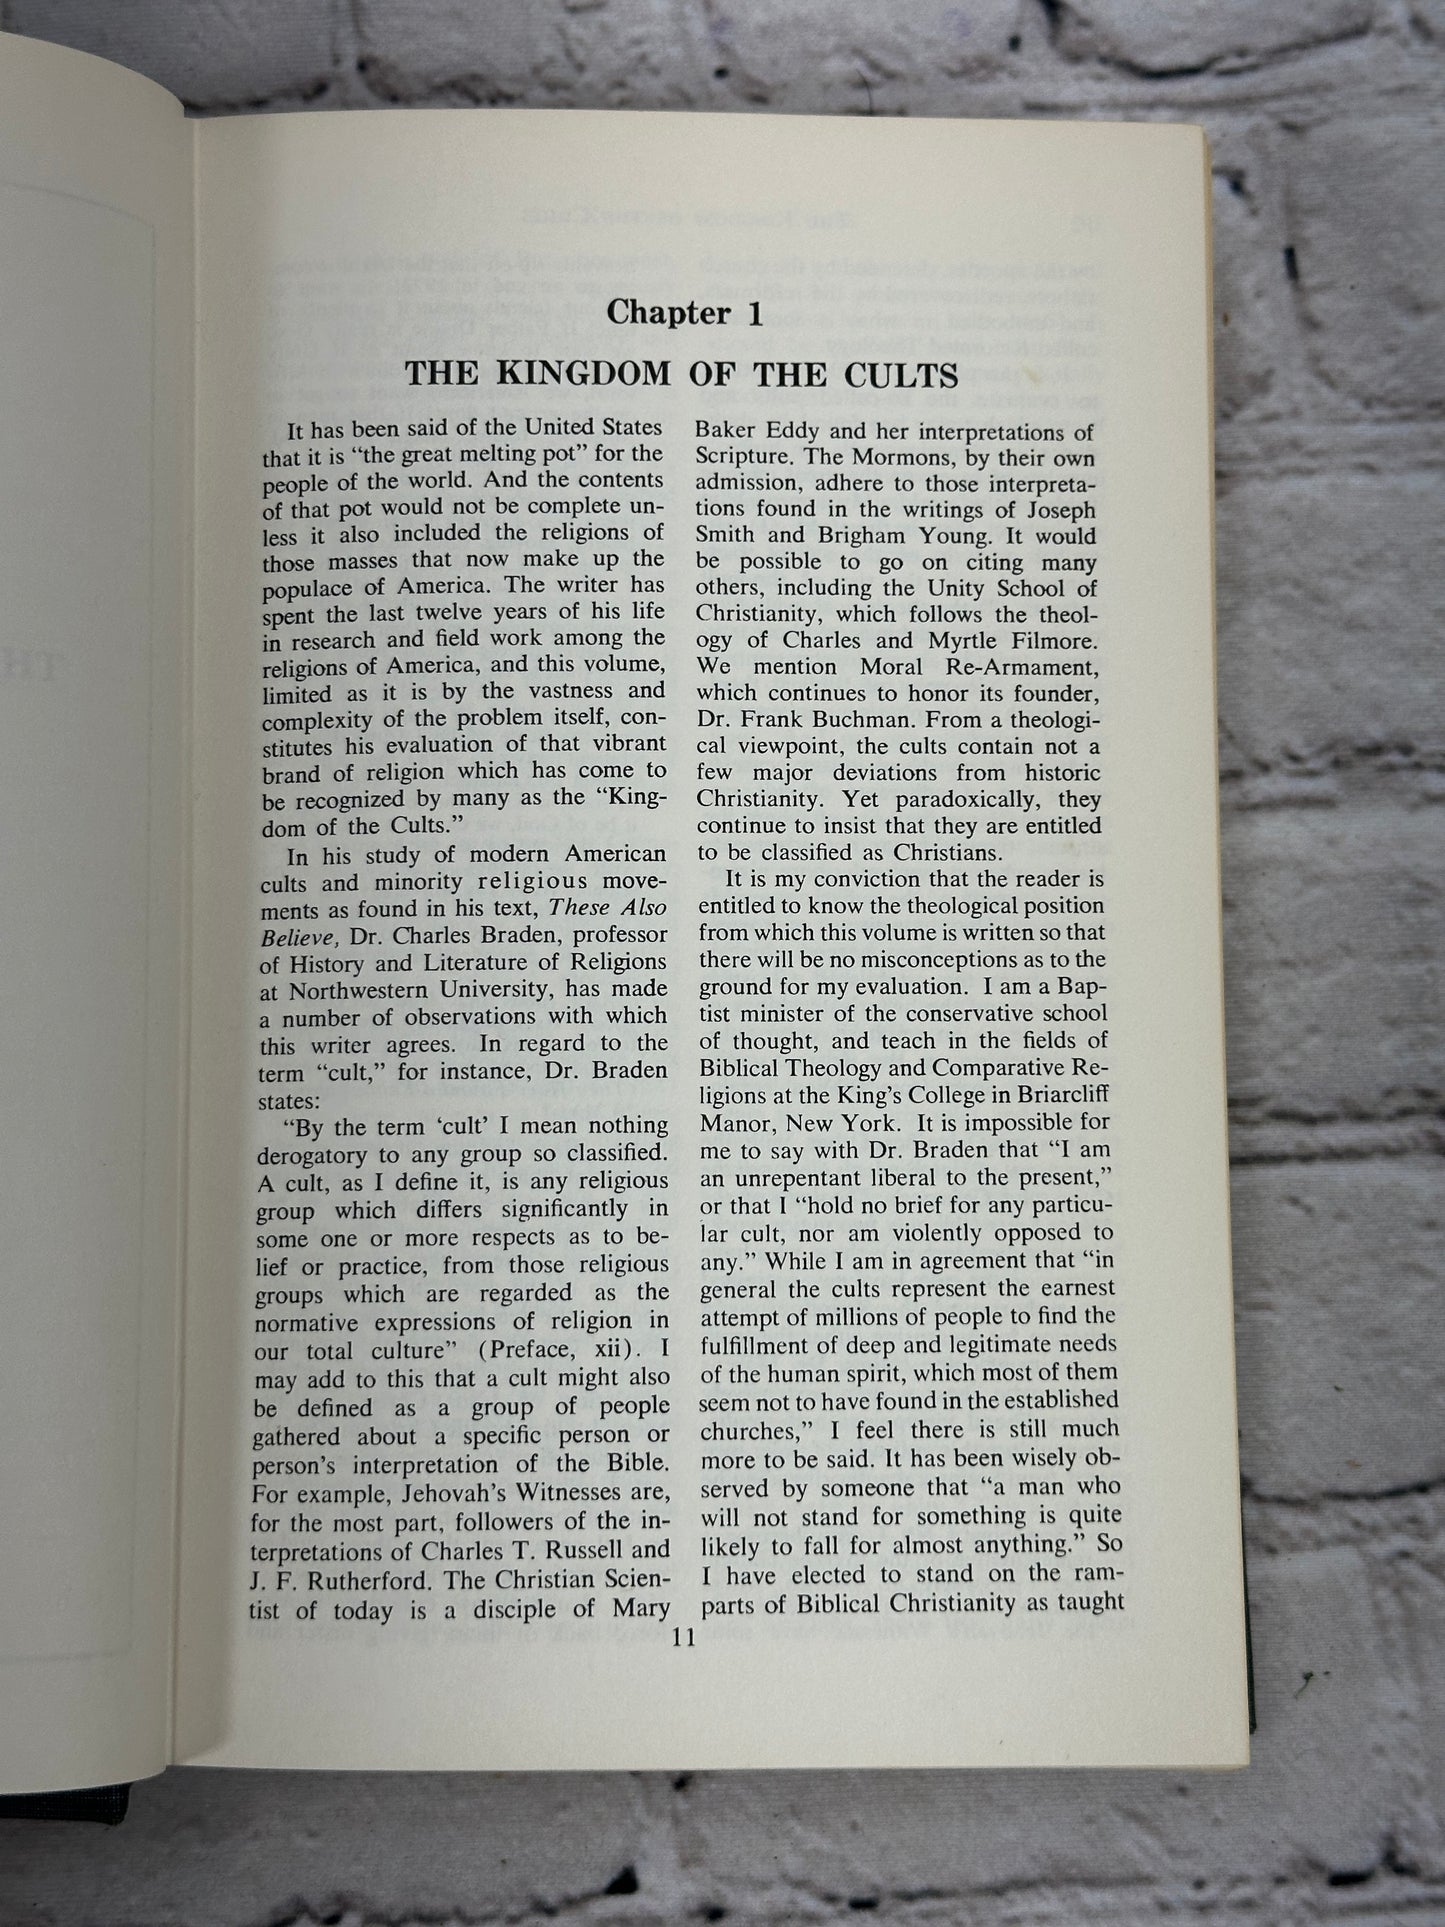 The Kingdom of the Cults by Walter Ralston Martin [1972 · Eleventh Printing]